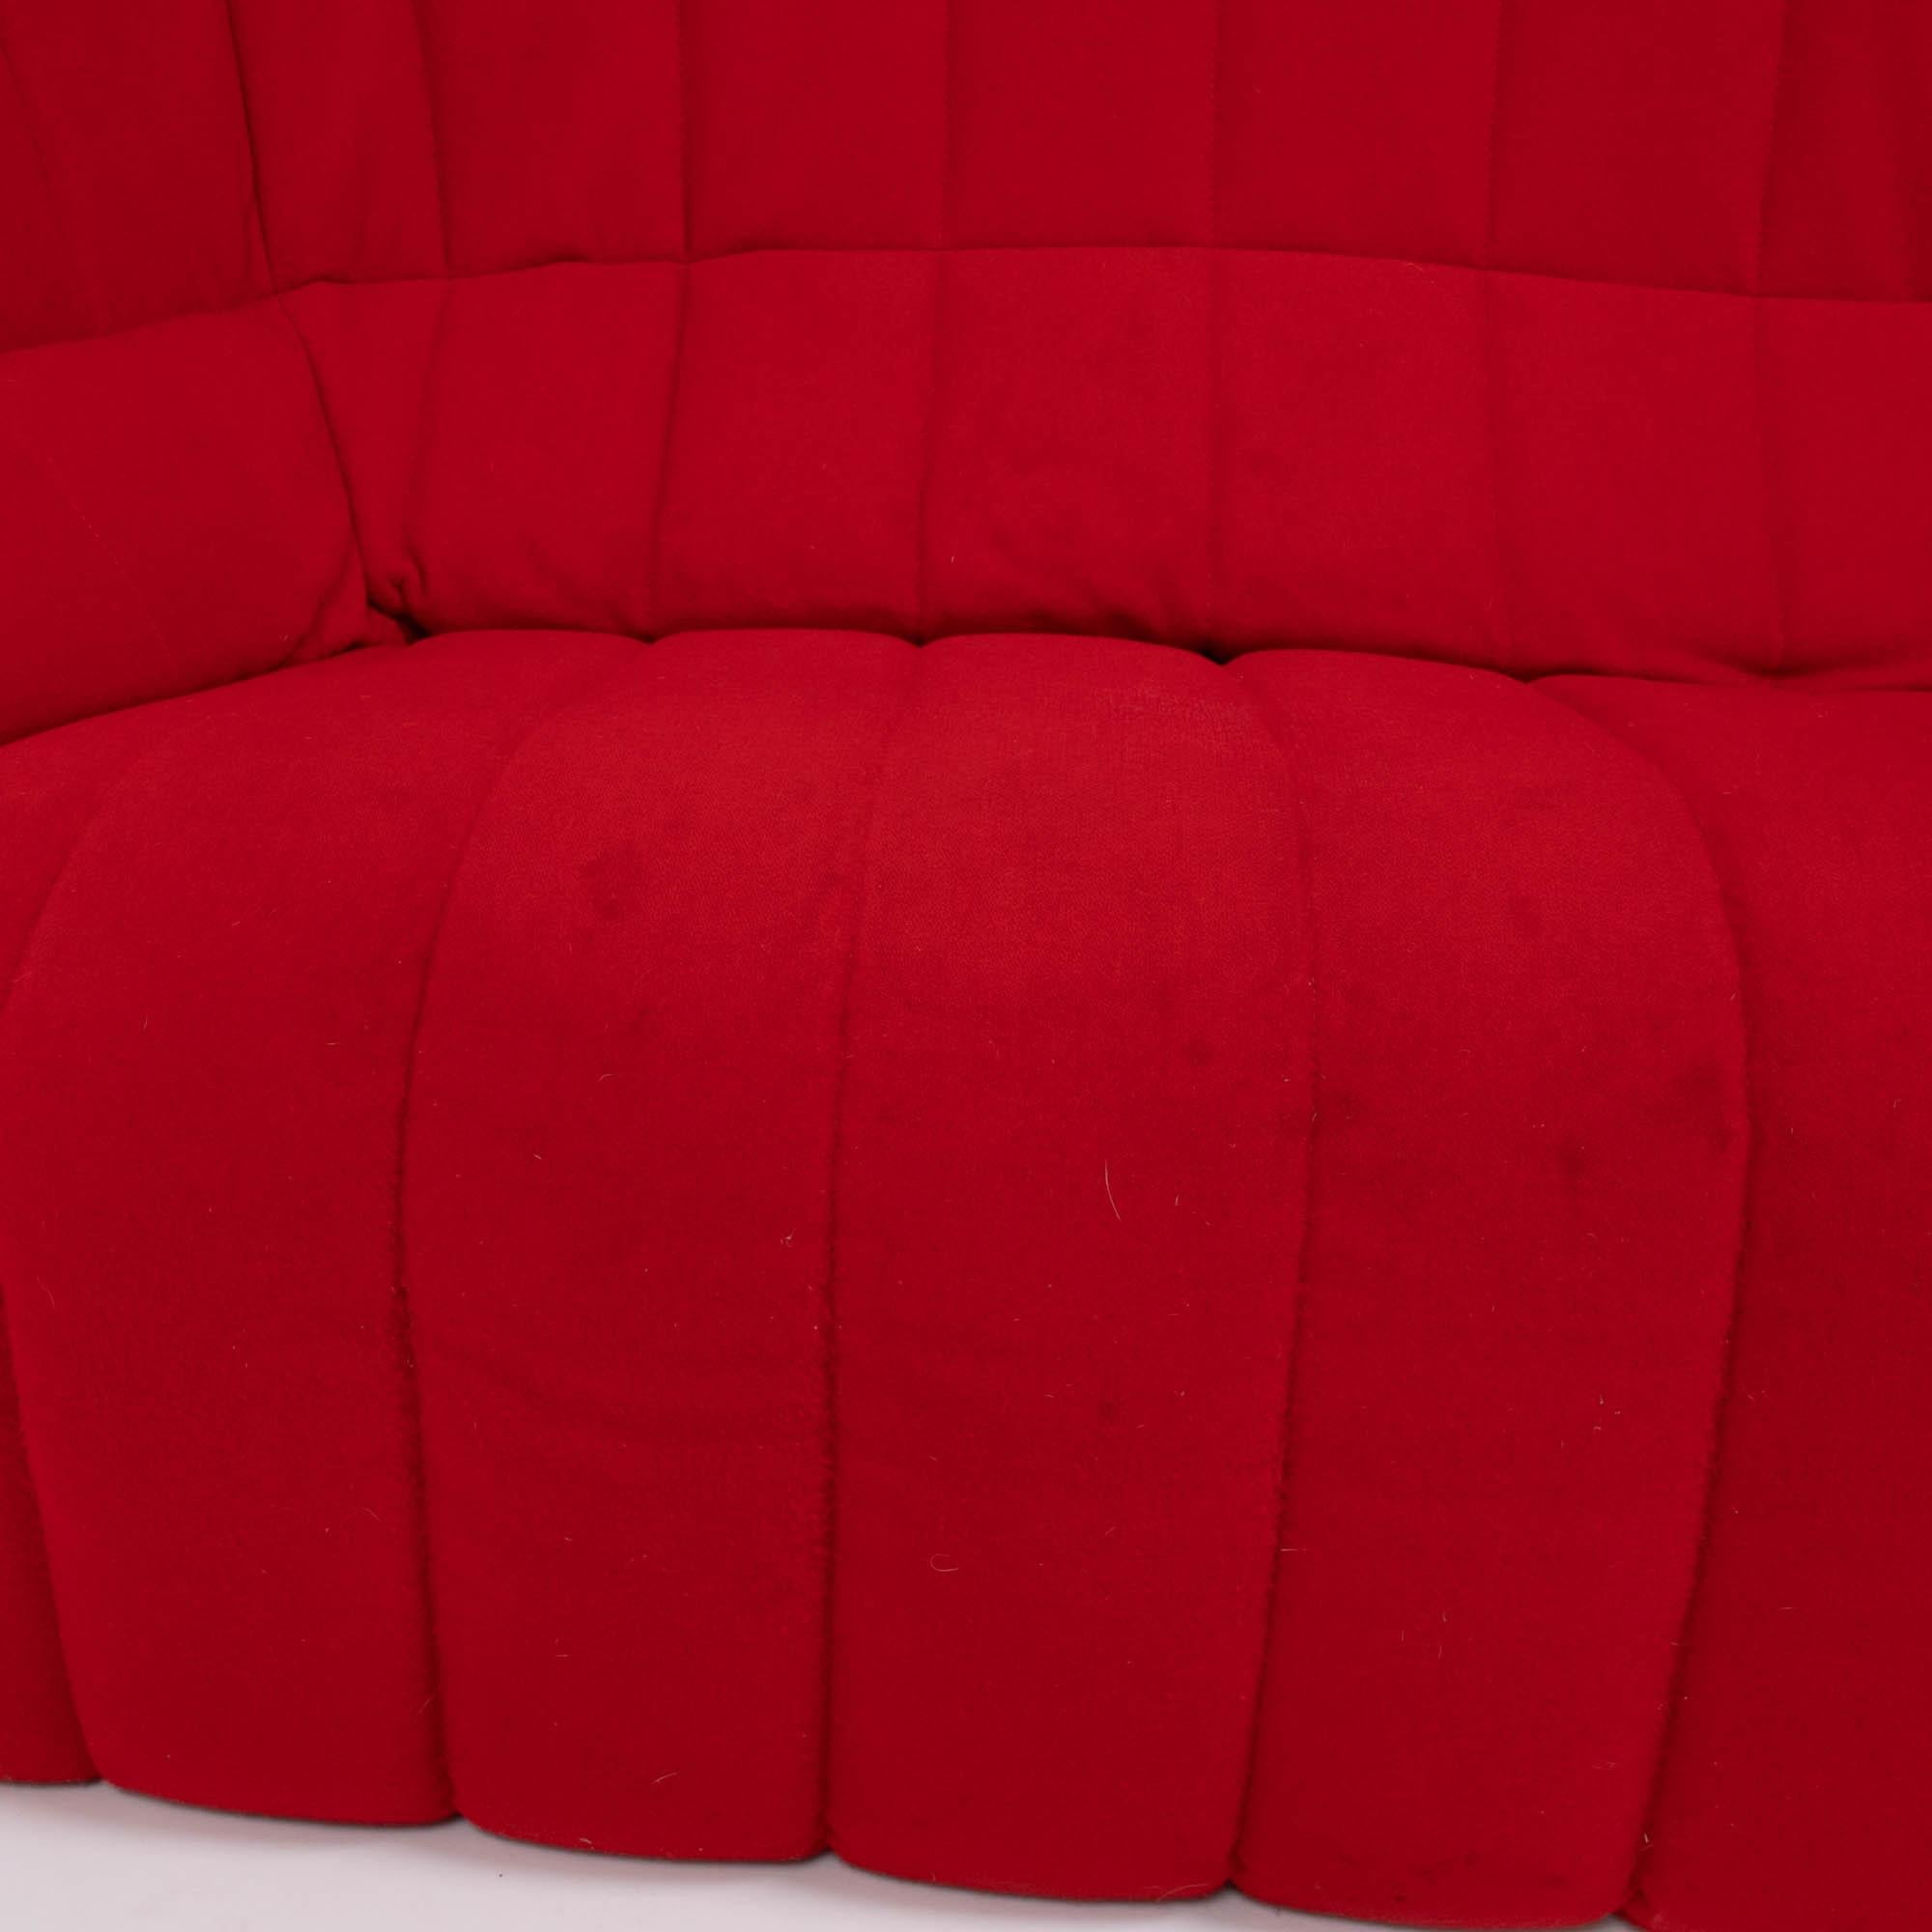 Ligne Roset by Inga Sempé Moel Red and Grey Quilted Loveseat Sofa, 2007 For Sale 3